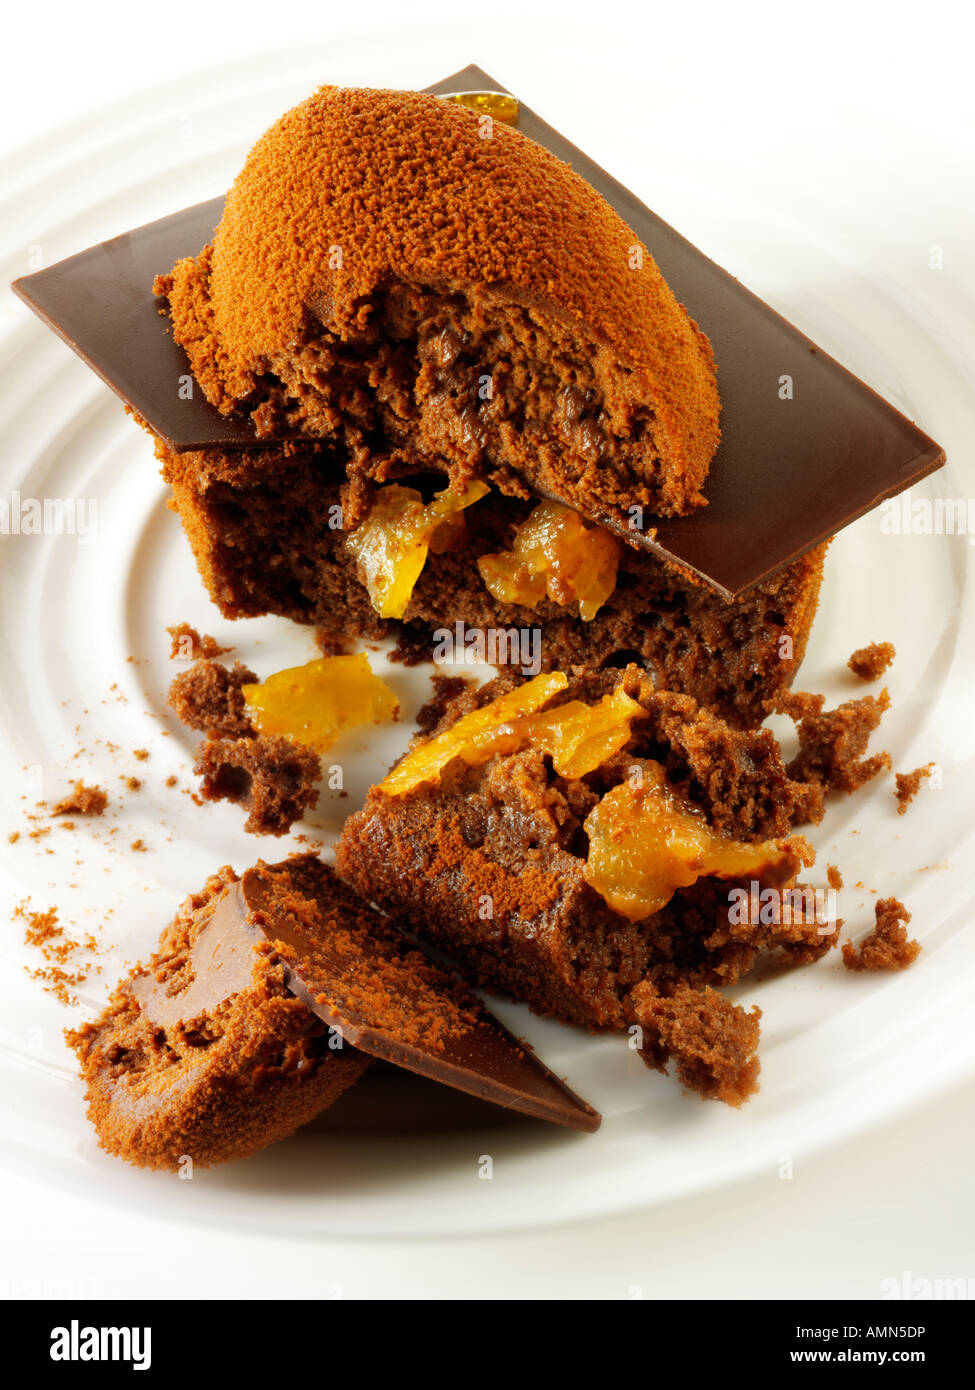 A hand made patisserie speciality rich indulgent chocolate cake filled with with coffee in a white table setting Stock Photo